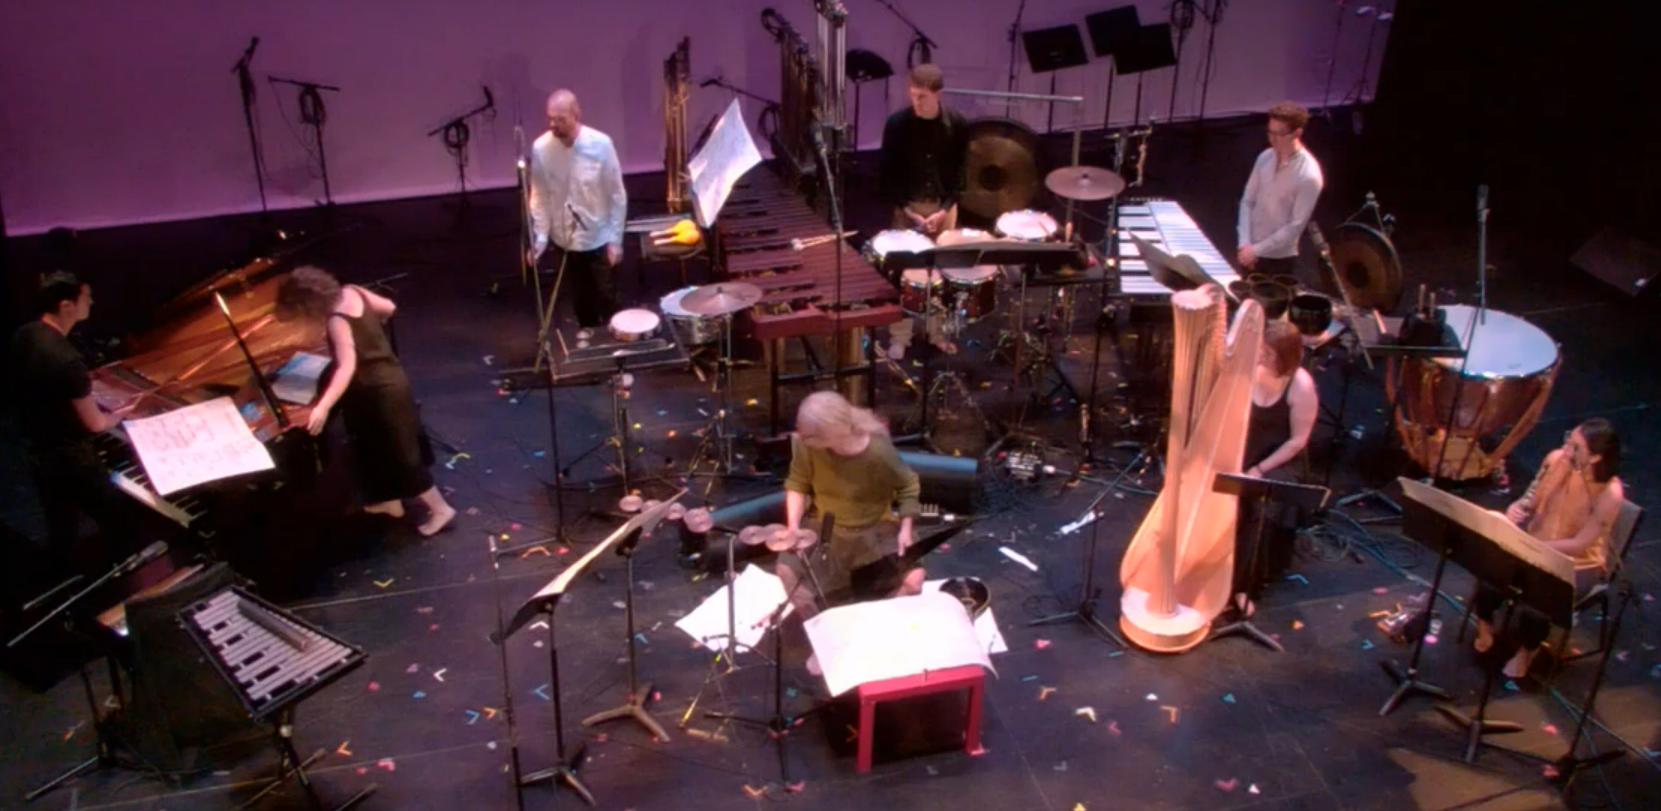 An eclectic variety of instruments and performers who traditionally don't perform together. A mix of percussionists, singers, a pianist, and strings